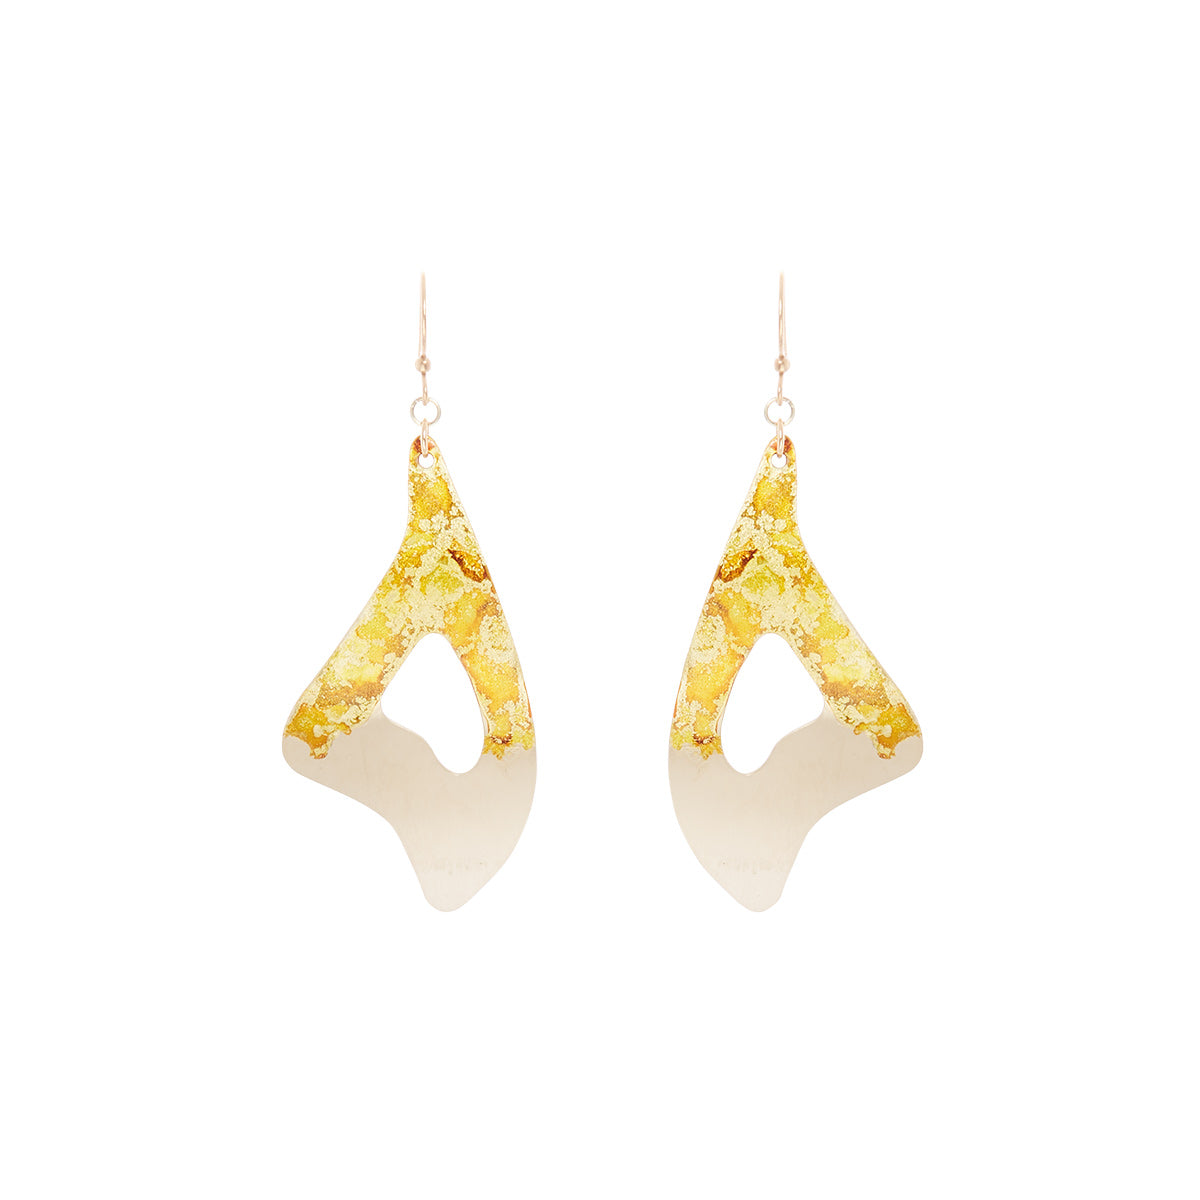 14K Gold Plated Mini Butterfly Earrings - Available in More Colors